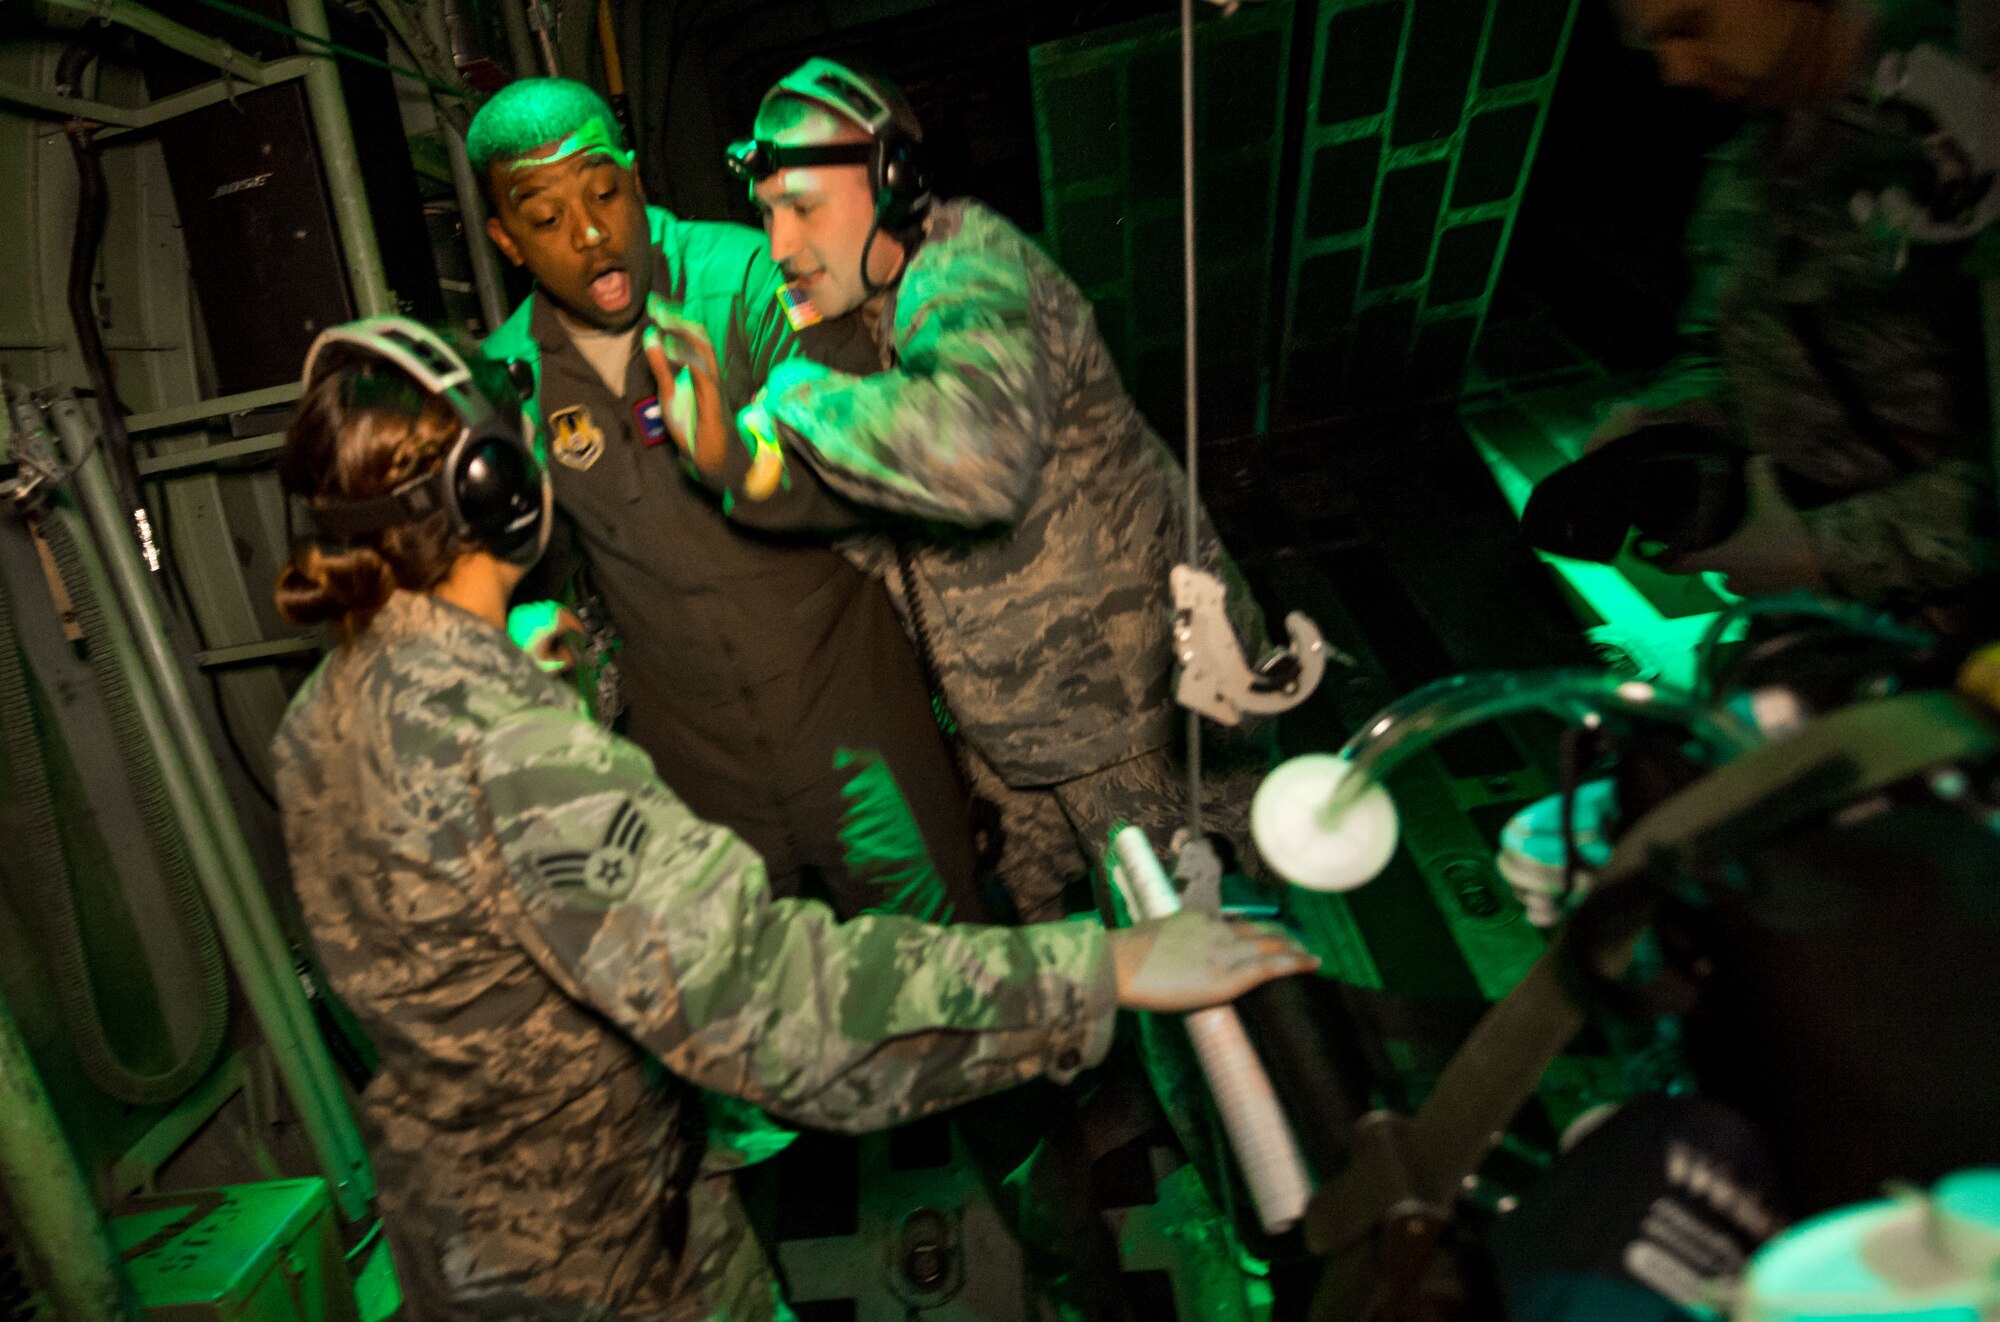 Flight Nurse and Aeromedical Technician Course students, Senior Airman Priscilla Oster and Airman 1st Class Travis Hammack, try to calm a role playing "psych patient", Tech Sgt. Donald Ennis, during a simulated Aeromedical Evacuation mission aboard a C-130 mockup at the 711th Human Performance Wing's U.S. Air Force School of Aerospace Medicine at Wright Patterson AFB, Ohio, Jan. 29, 2018. (U.S. Air Force photo by J.M. Eddins Jr.)